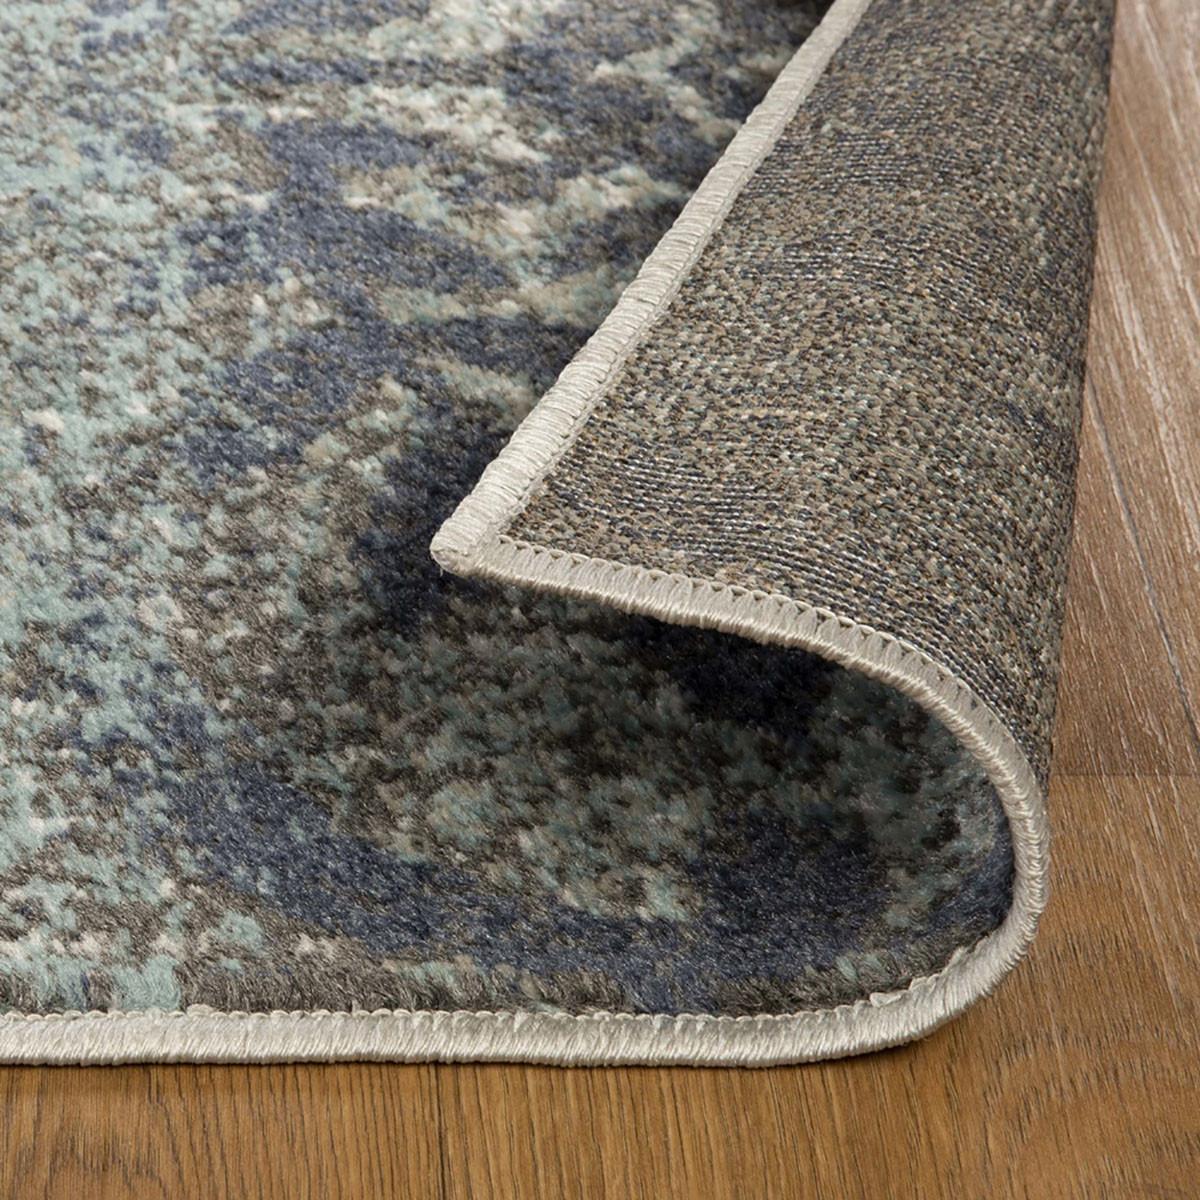 8' X 10' Teal And Gray Damask Distressed Stain Resistant Area Rug